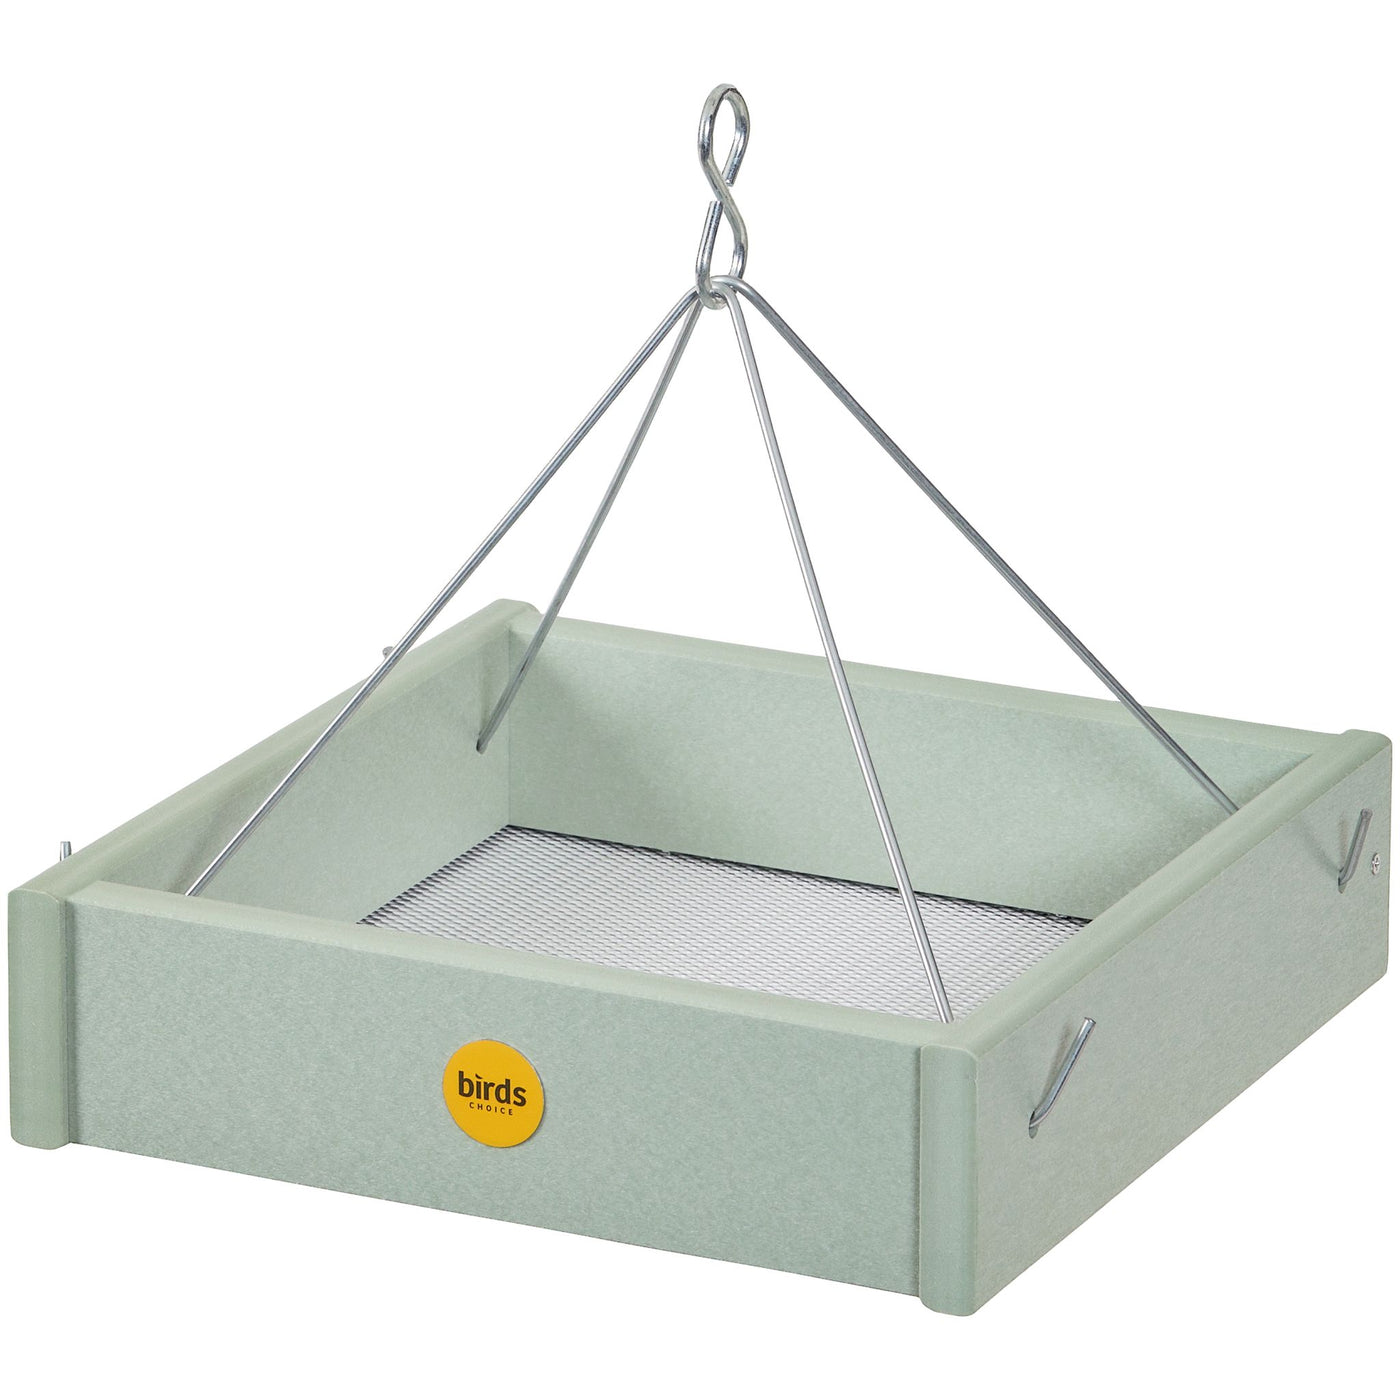 Small Hanging Platform Bird Feeder in Green Recycled Plastic